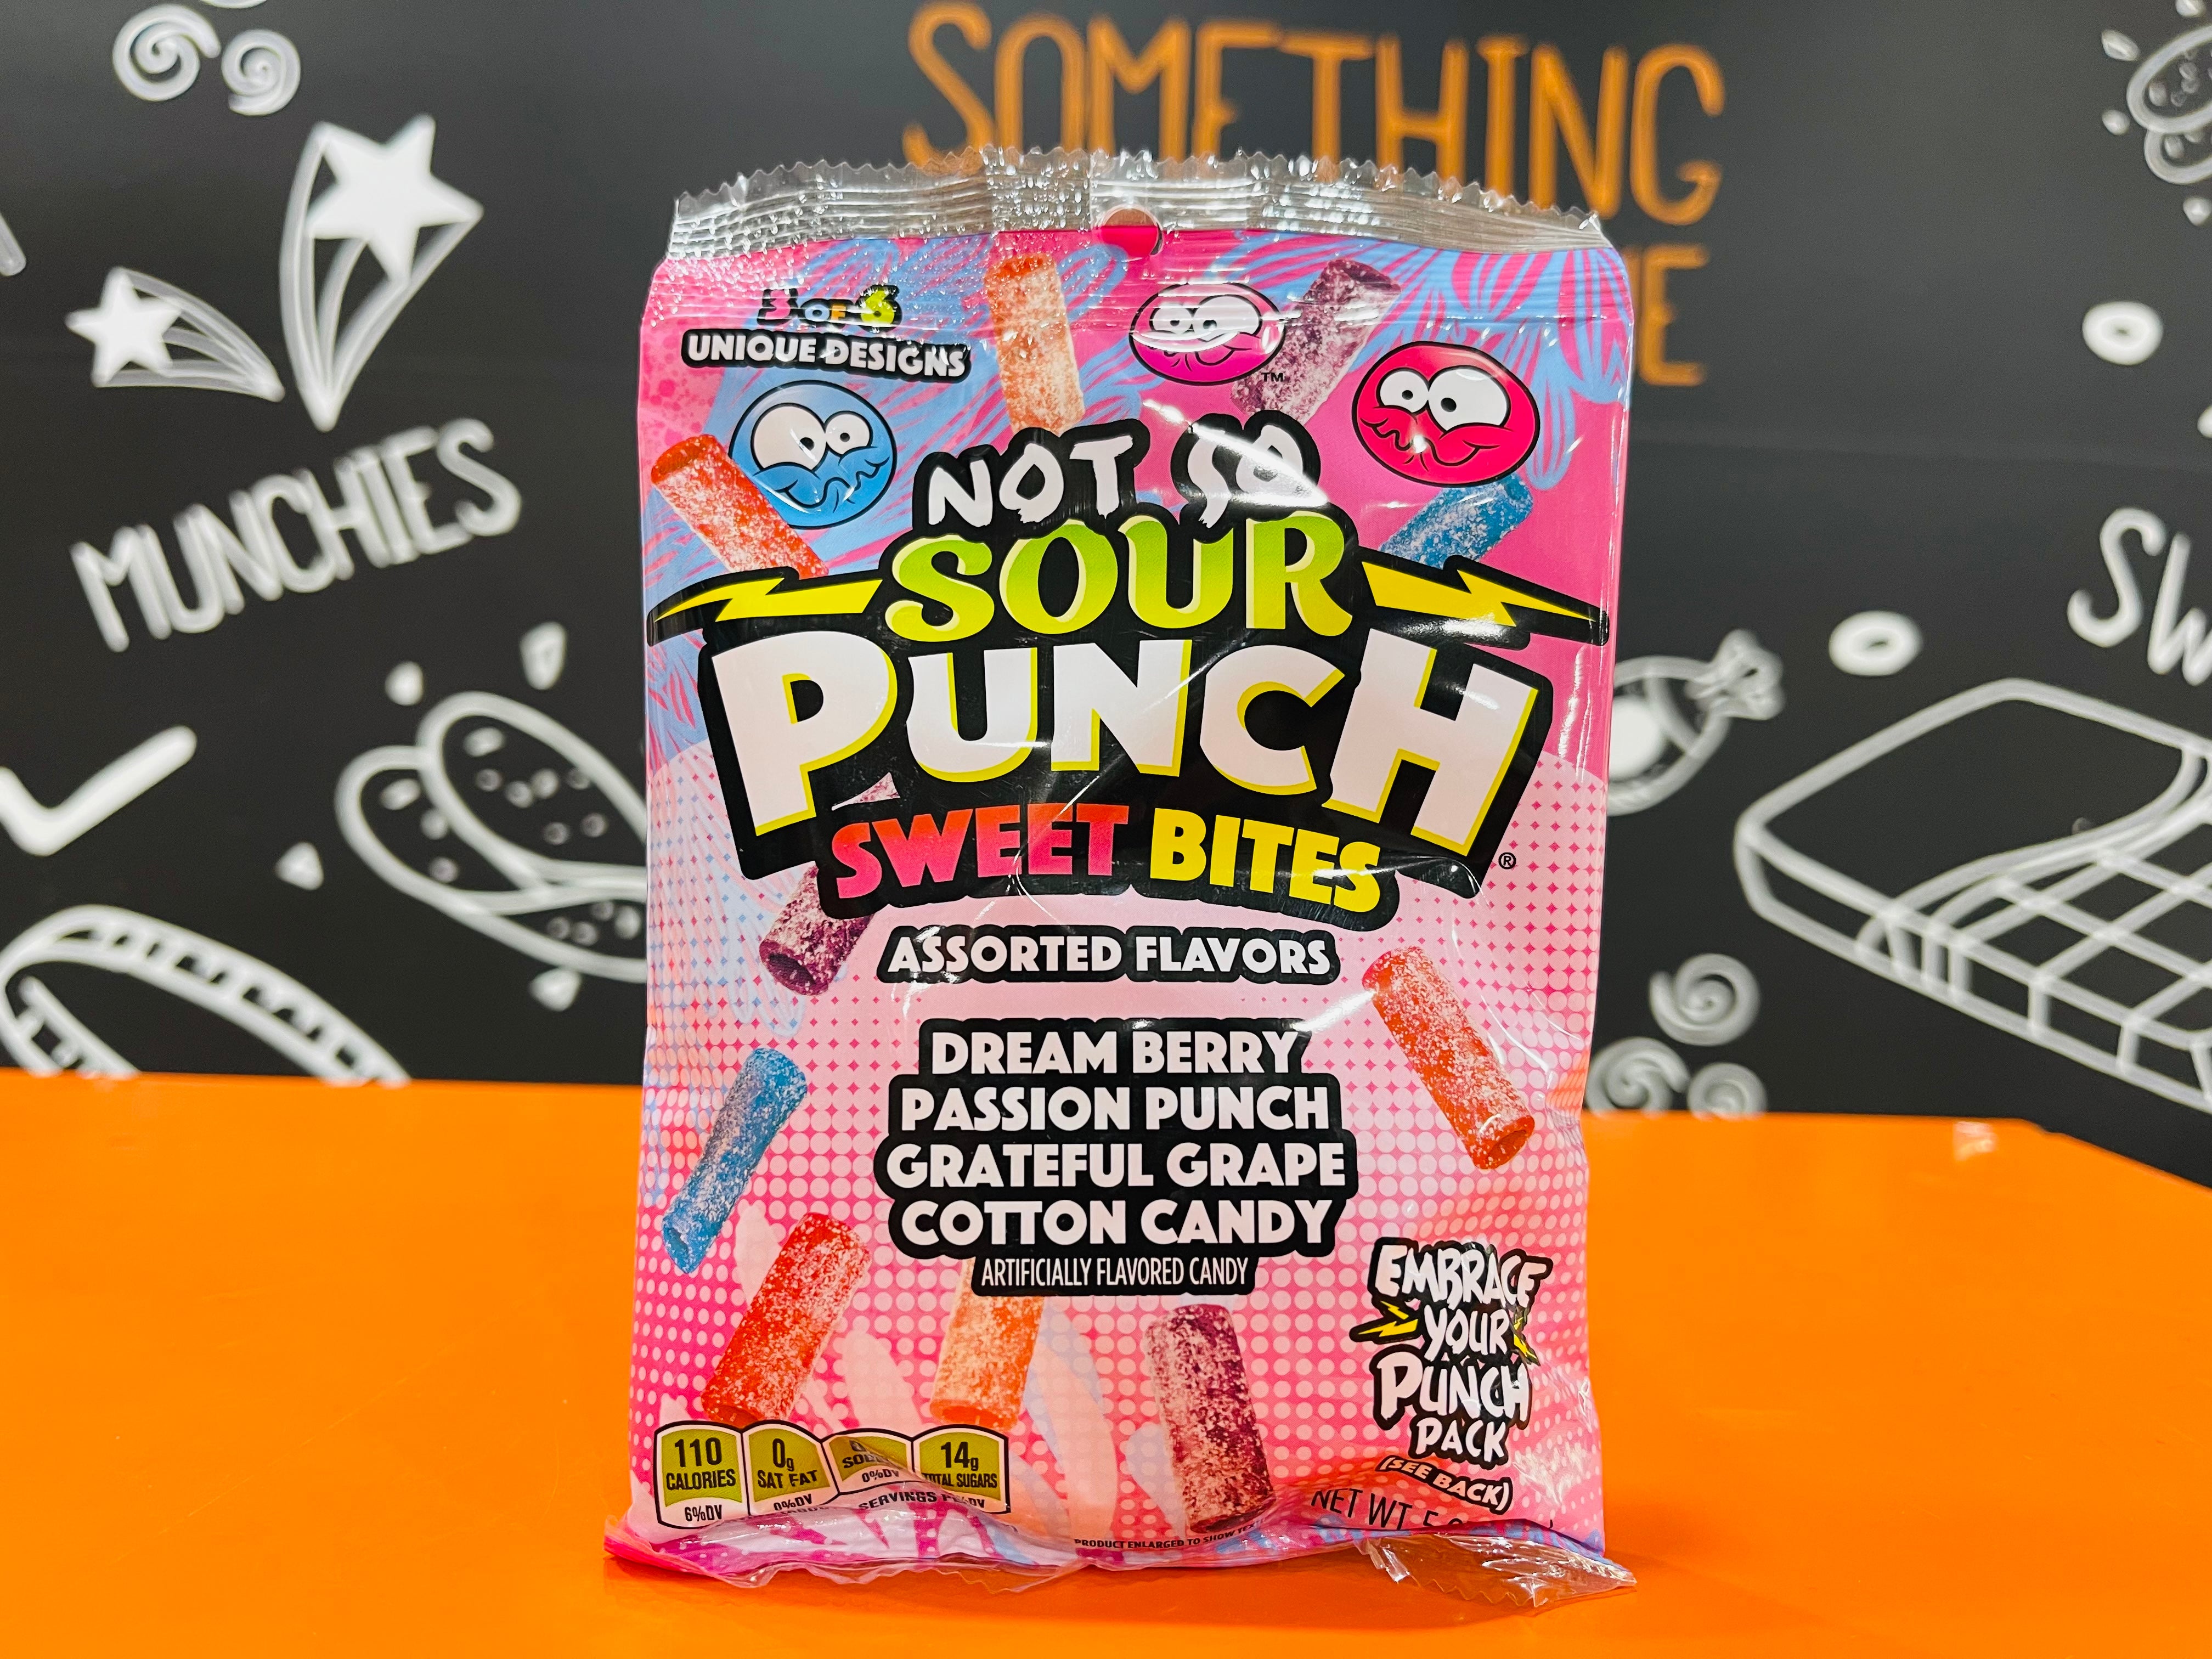 Sour Punch Sweet Bites